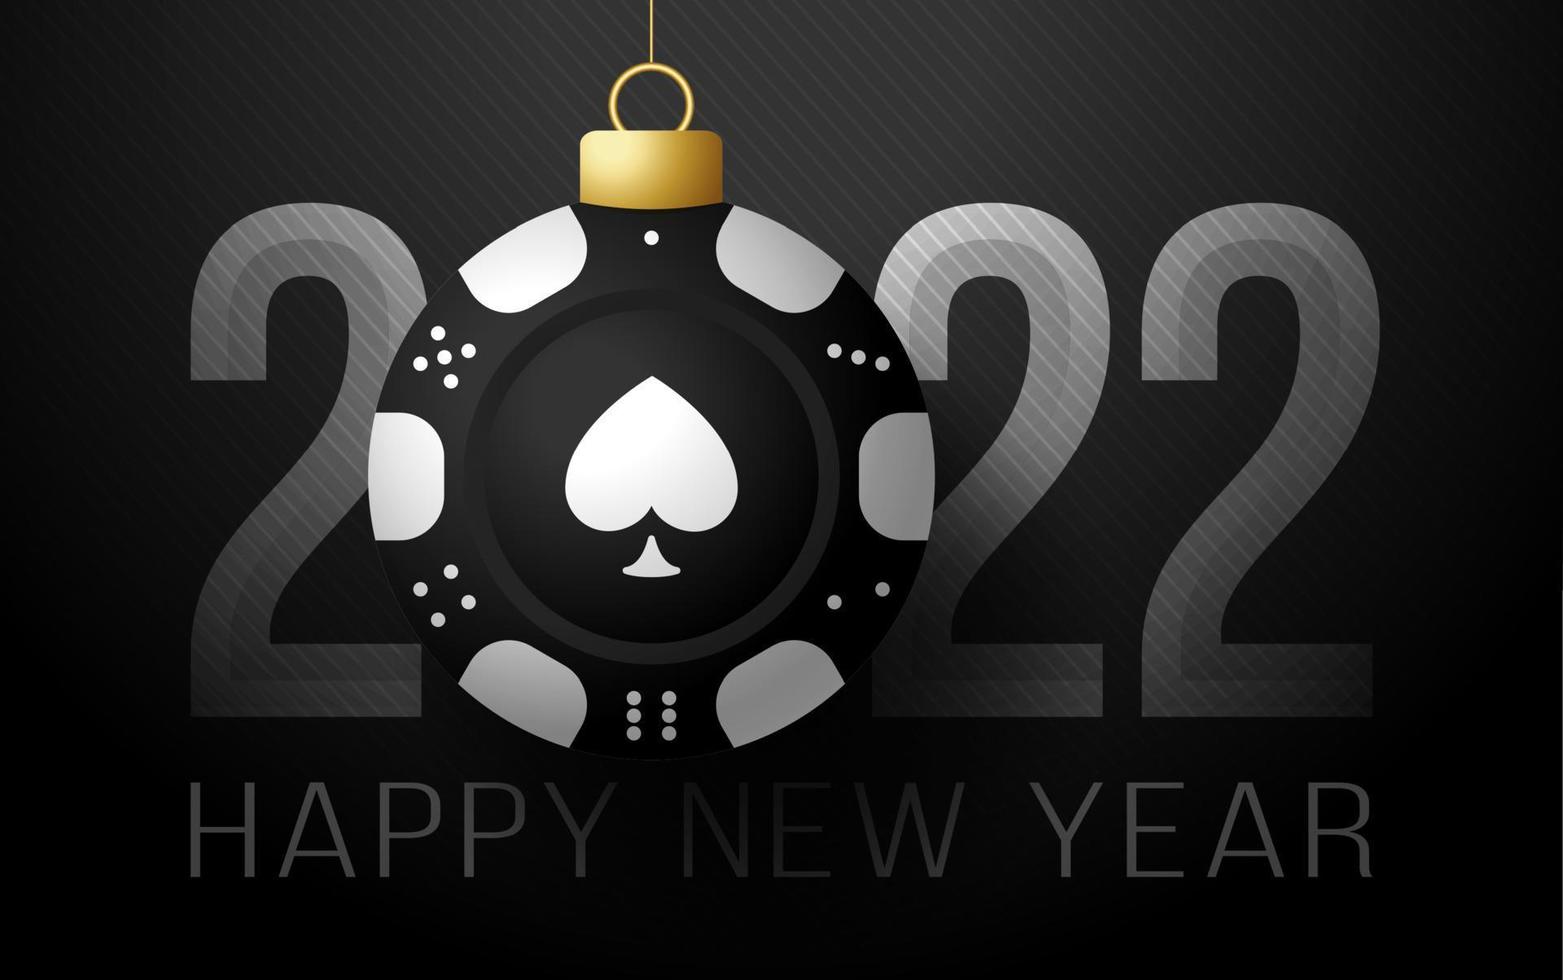 Casino poker chip 2022 Happy New Year. Sports gamble greeting card with casino poker chip on the luxury background. Vector illustration